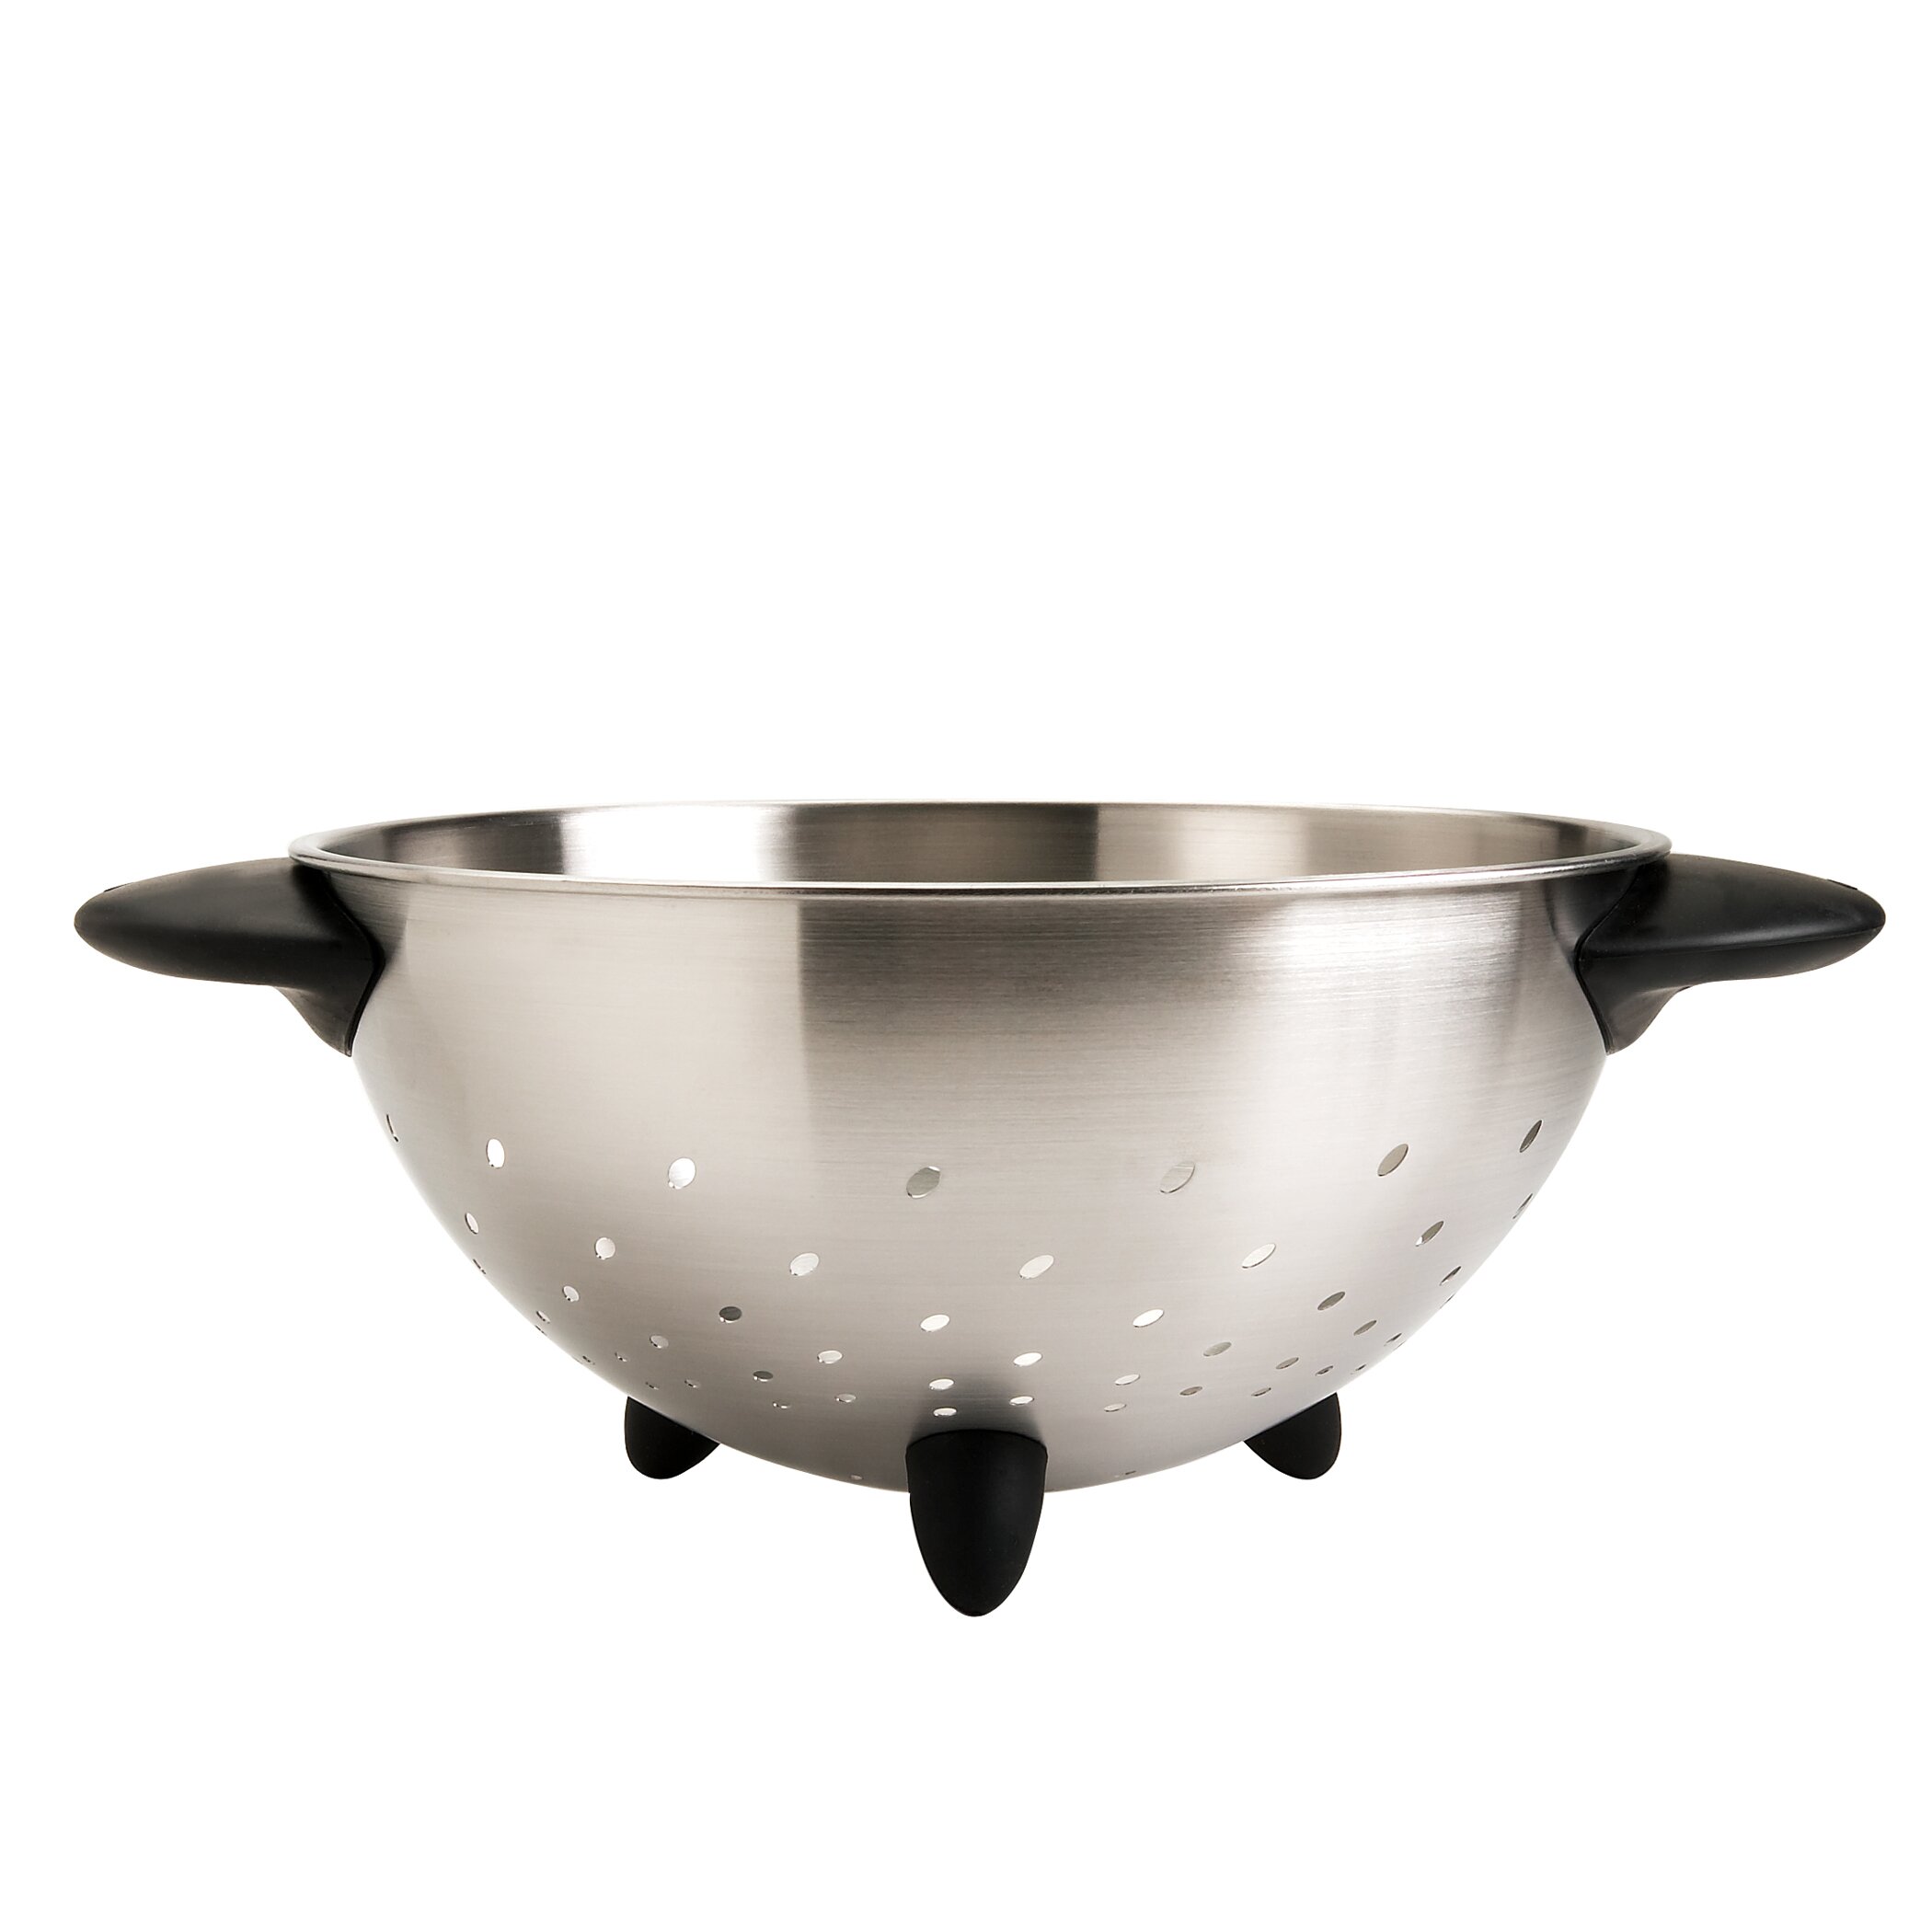 OXO Good Grip Stainless Steel Colander & Reviews | Wayfair Oxo Good Grips Stainless Steel Colander